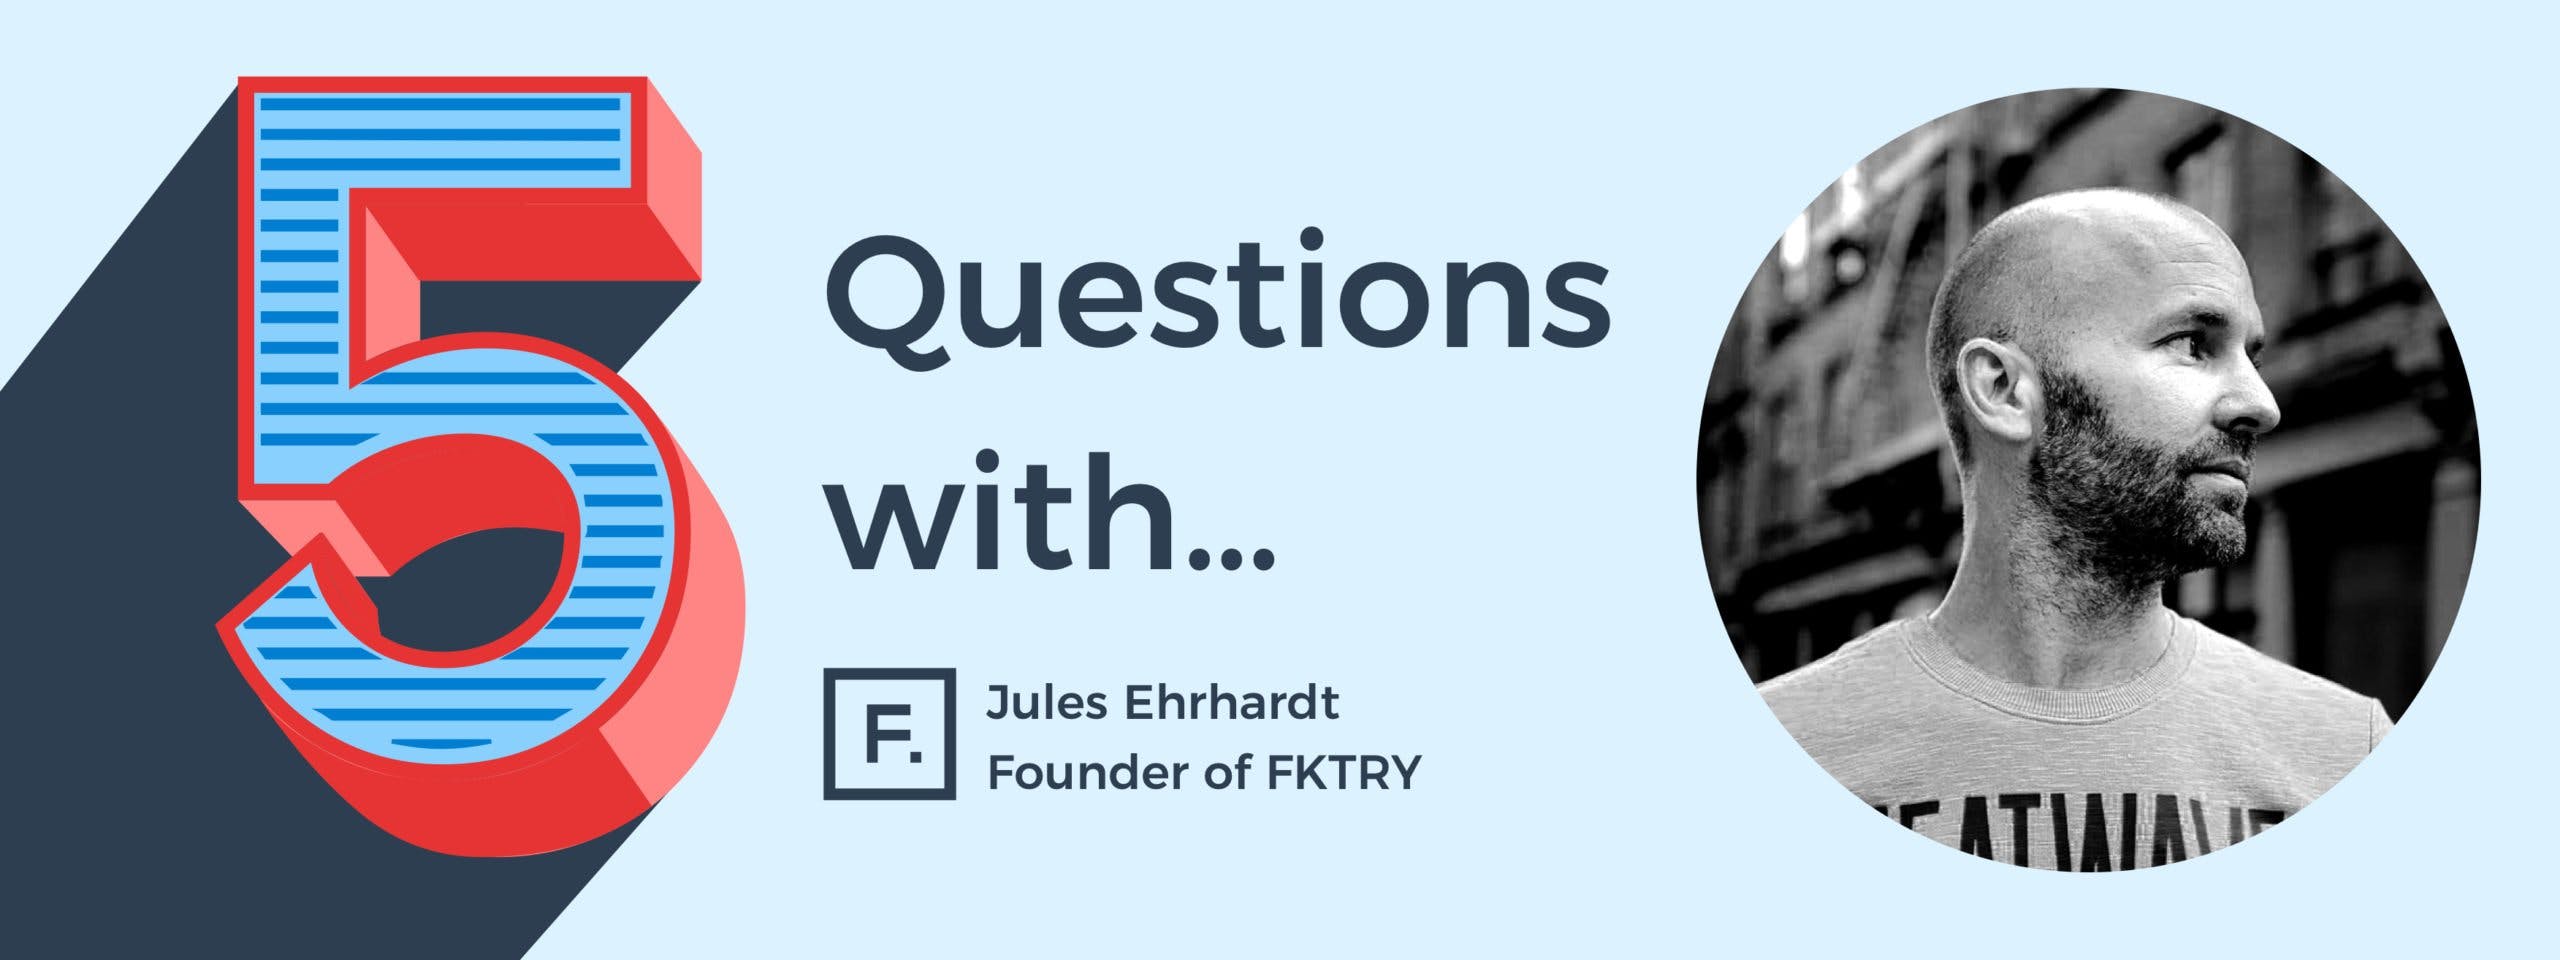 5 Questions with Jules Ehrhardt, Founder of FKTRY